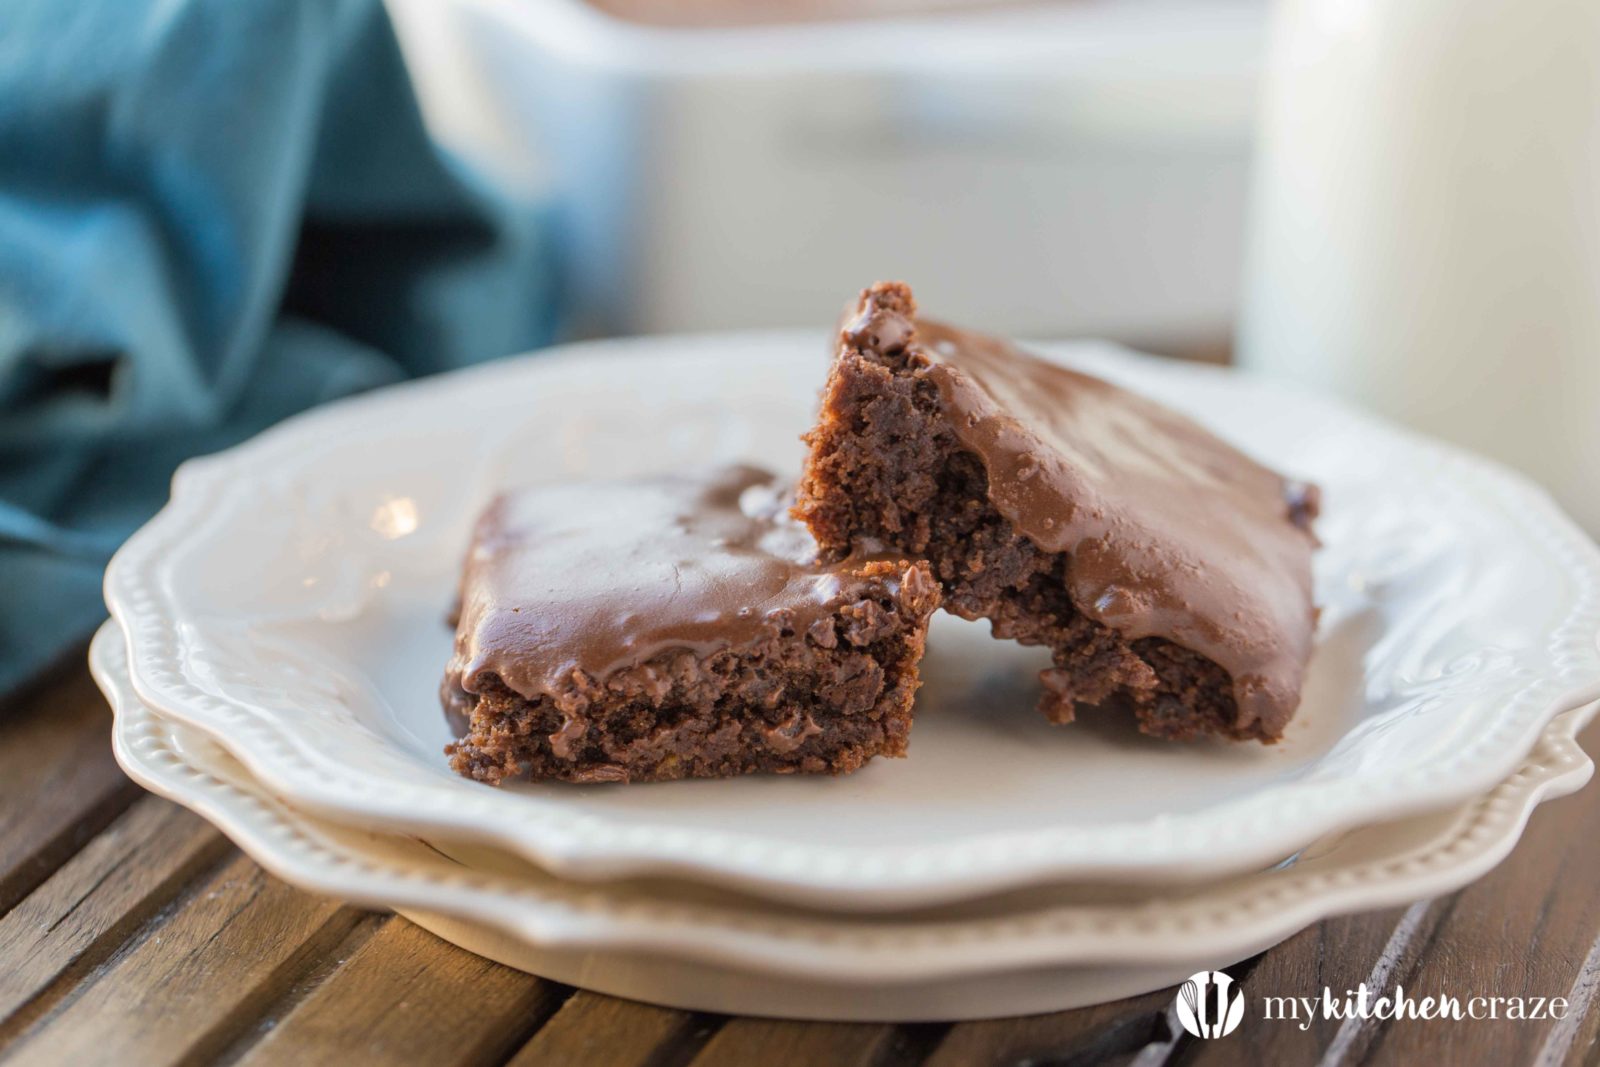 Frosted Brownies are a must have recipe! Brownies that are moist, delicious and the frosting takes these brownies to a whole new level. Grab that glass of milk because you'll want it with a slice of these yummy Frosted Brownies!